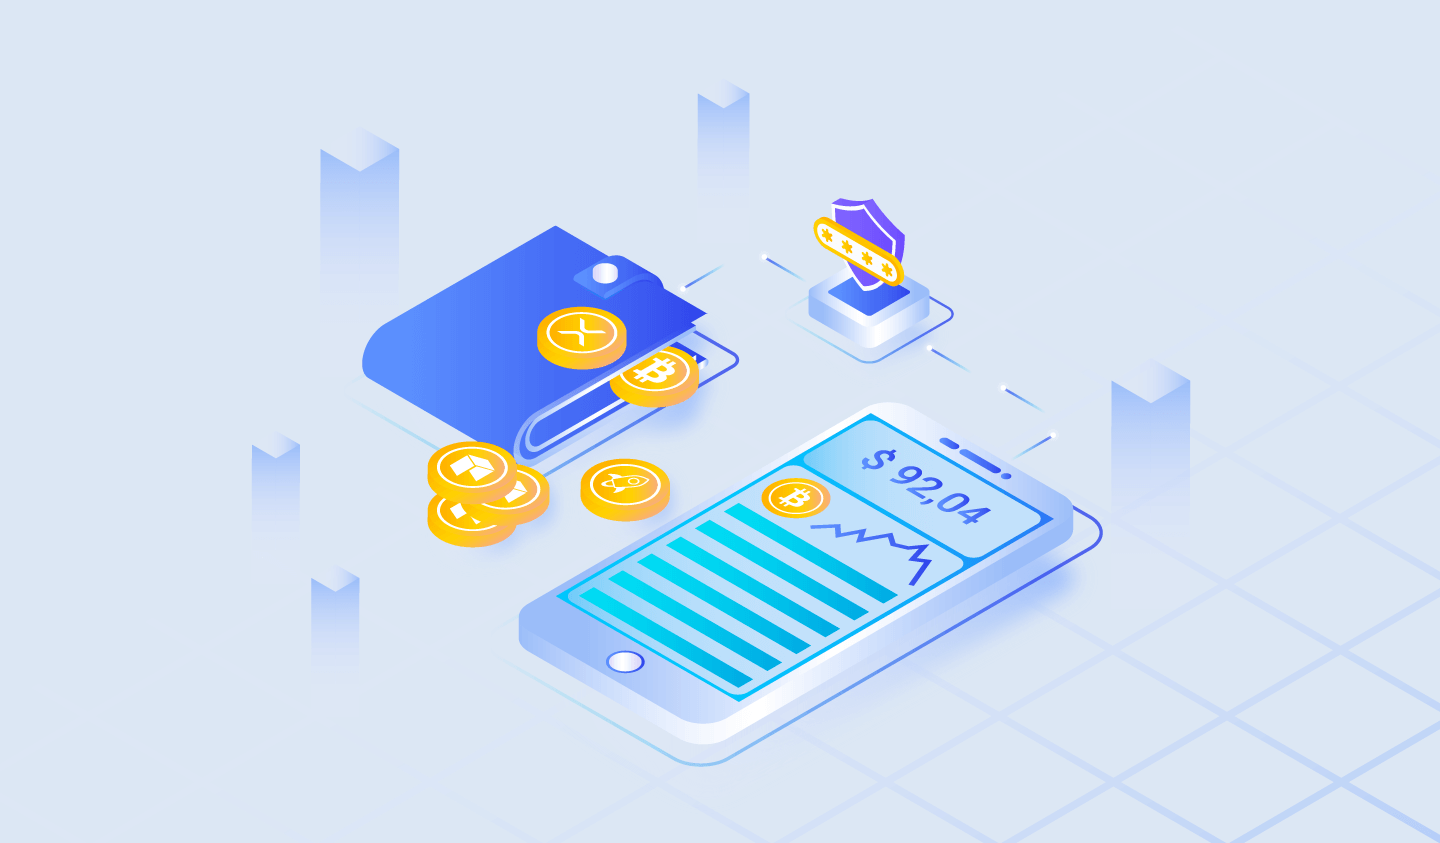 What is Blockchain Wallet and How Does It Work?